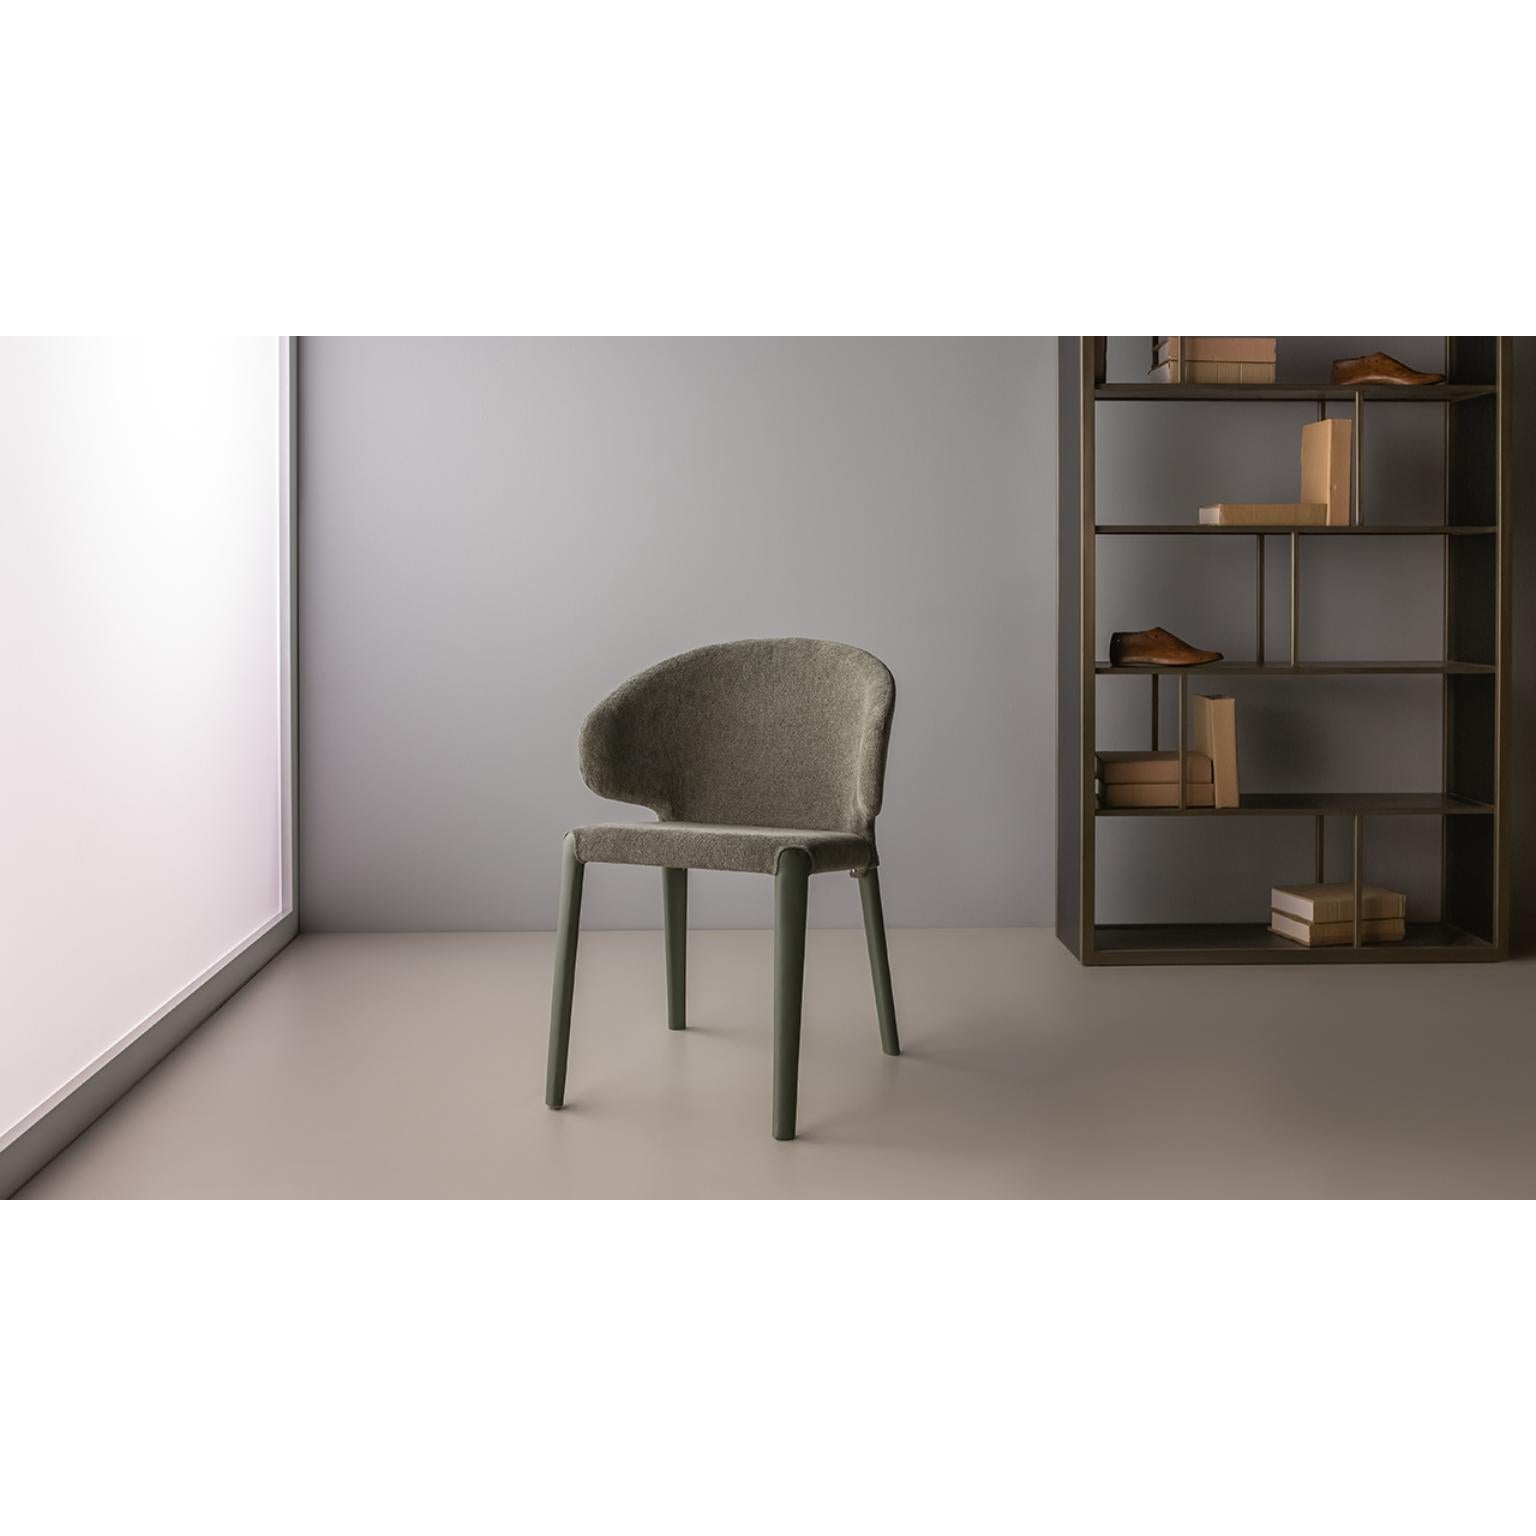 Hella Chair by Doimo Brasil
Dimensions: W 59 x D 58 x H 78 cm 
Materials: Metal, Upholstered seat.


With the intention of providing good taste and personality, Doimo deciphers trends and follows the evolution of man and his space. To this end, it